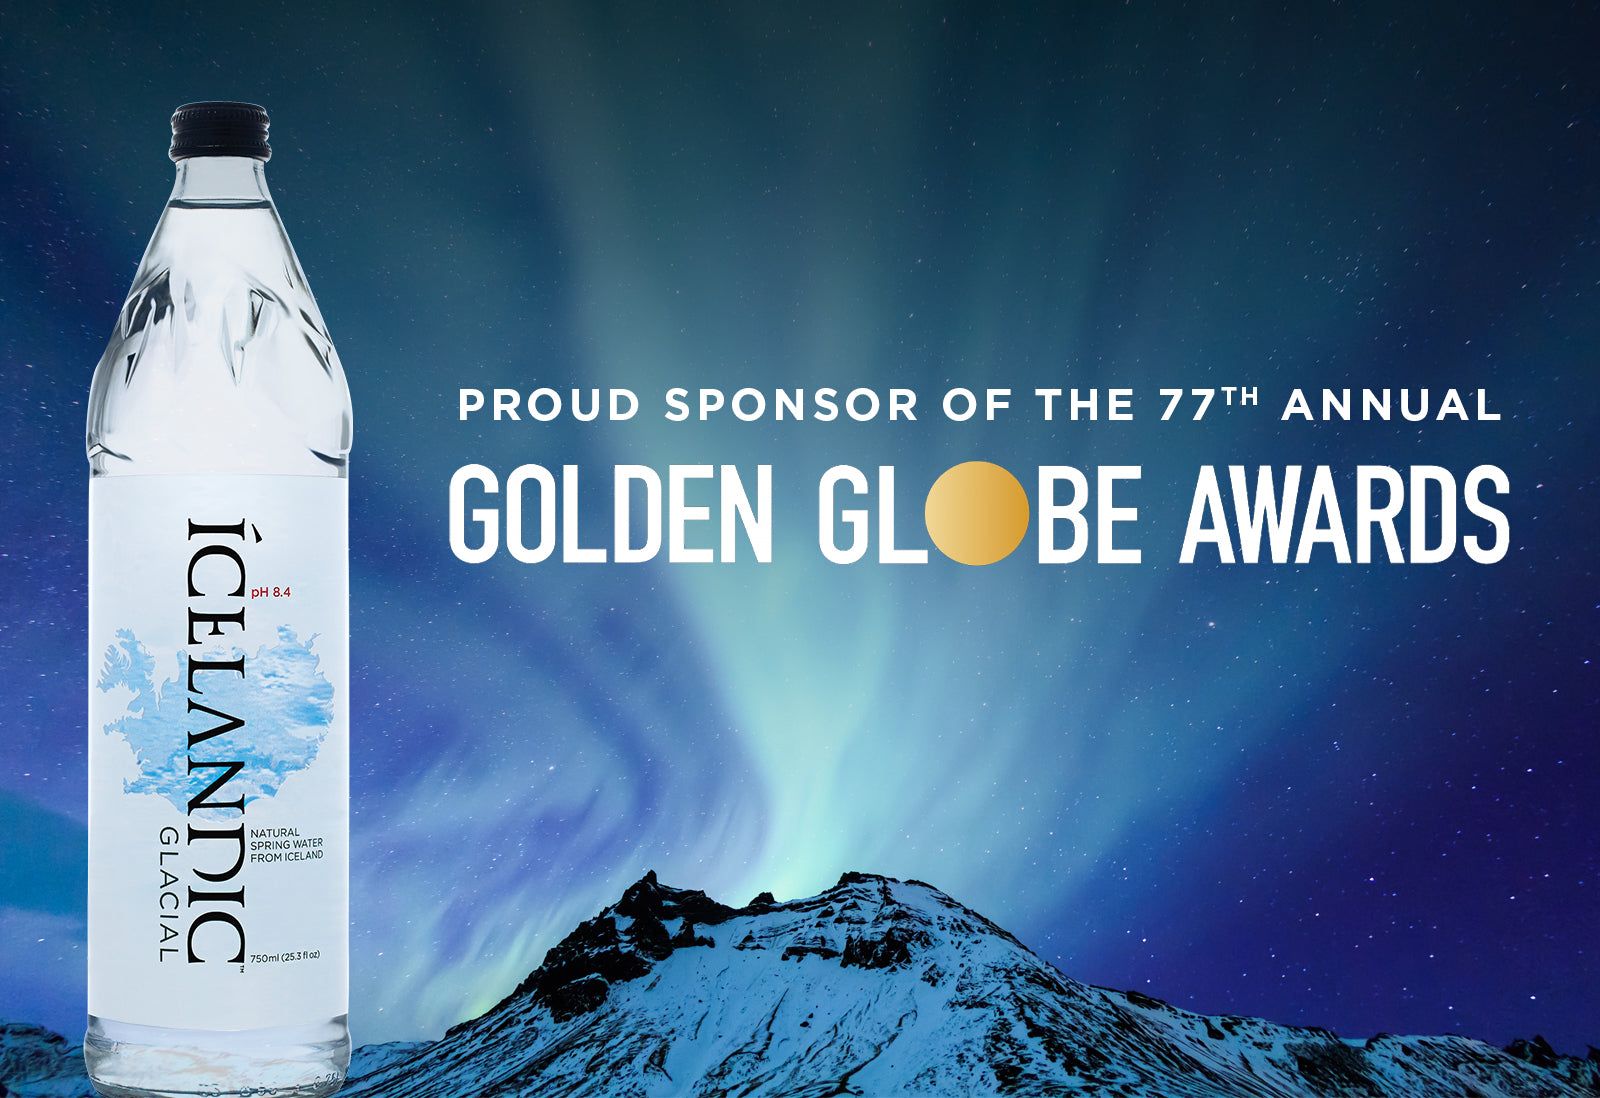 Icelandic Glacial Unveiled as the Official Water Sponsor of the Golden Globes